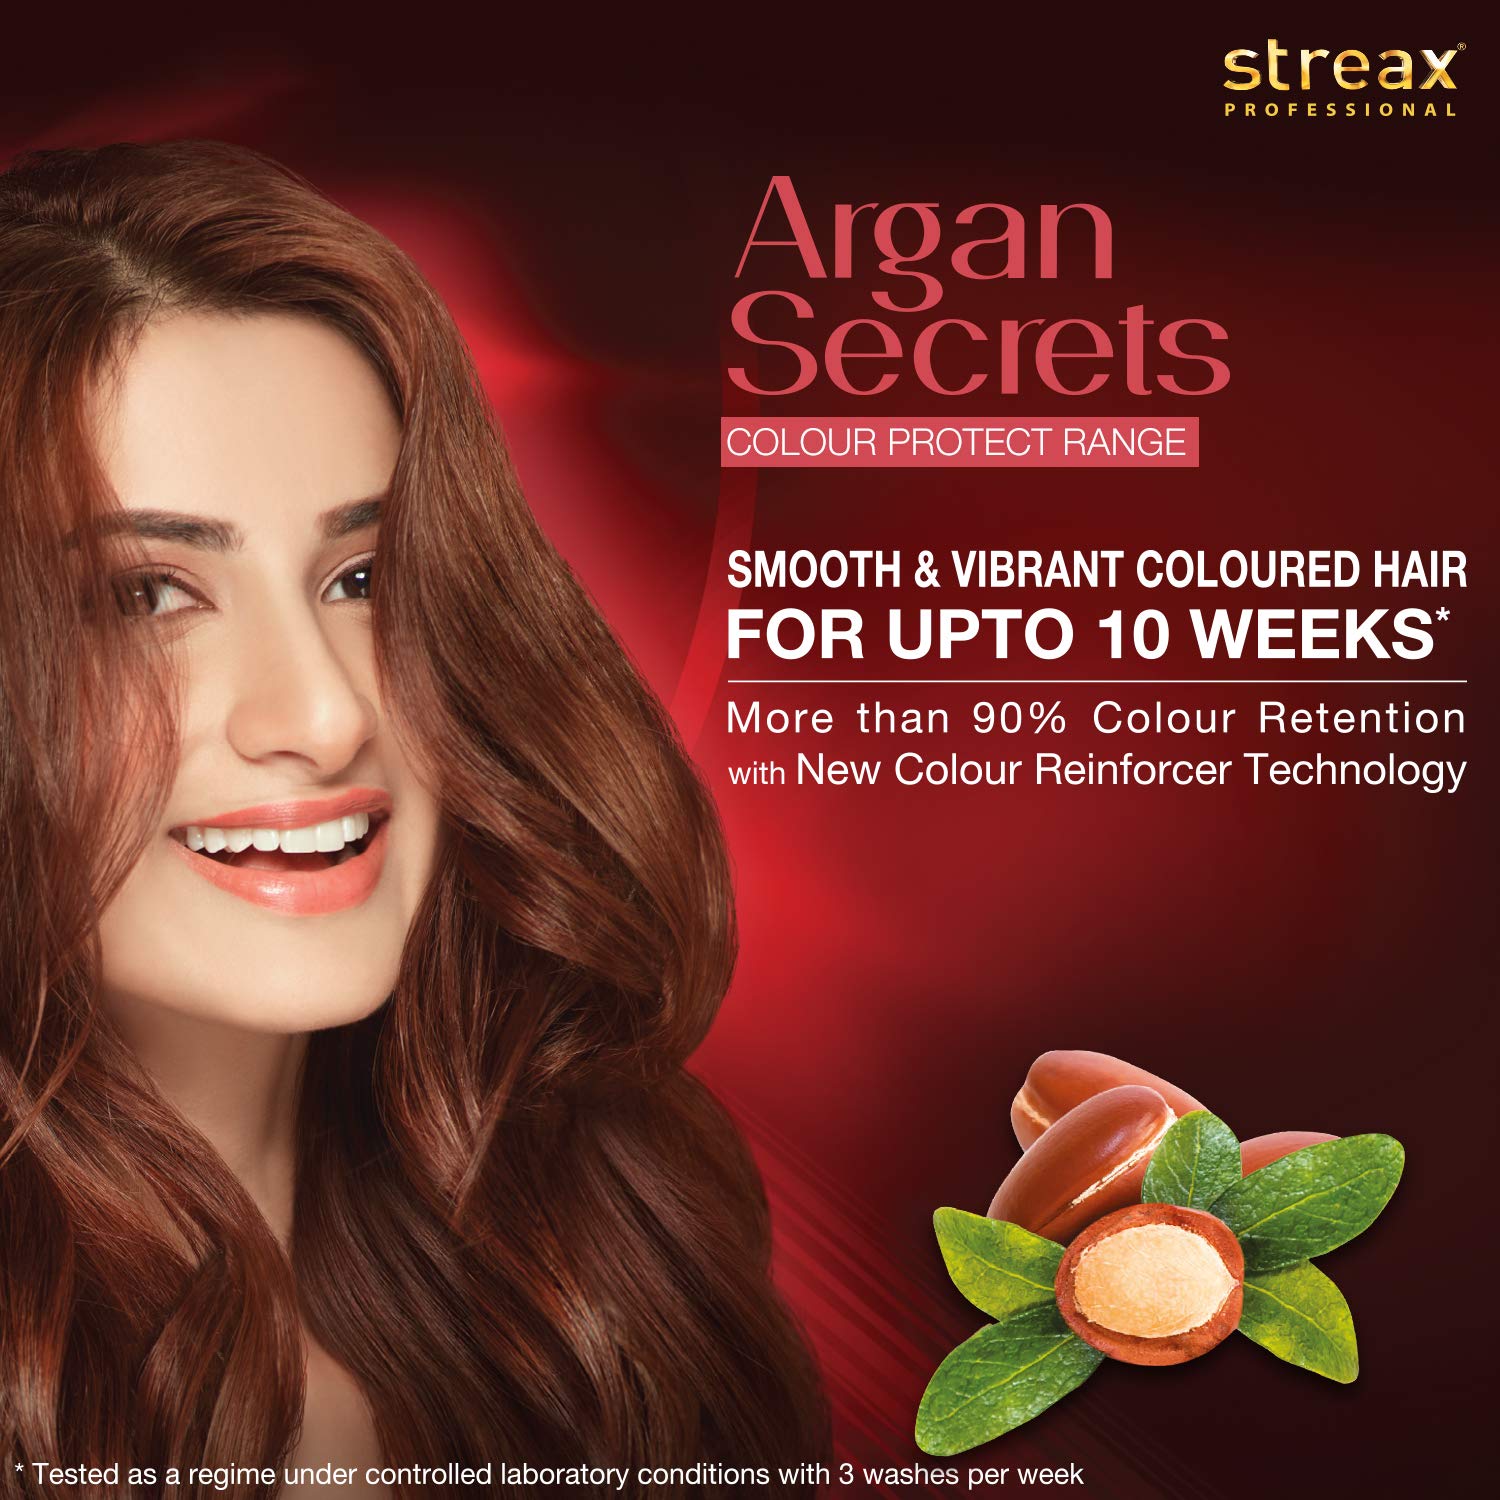 Streax Professional Bangladesh  Order Flame Red 06 Streax Hair Colour  today Limited Packs are our available only Inbox us oder and change your  look with it   Facebook